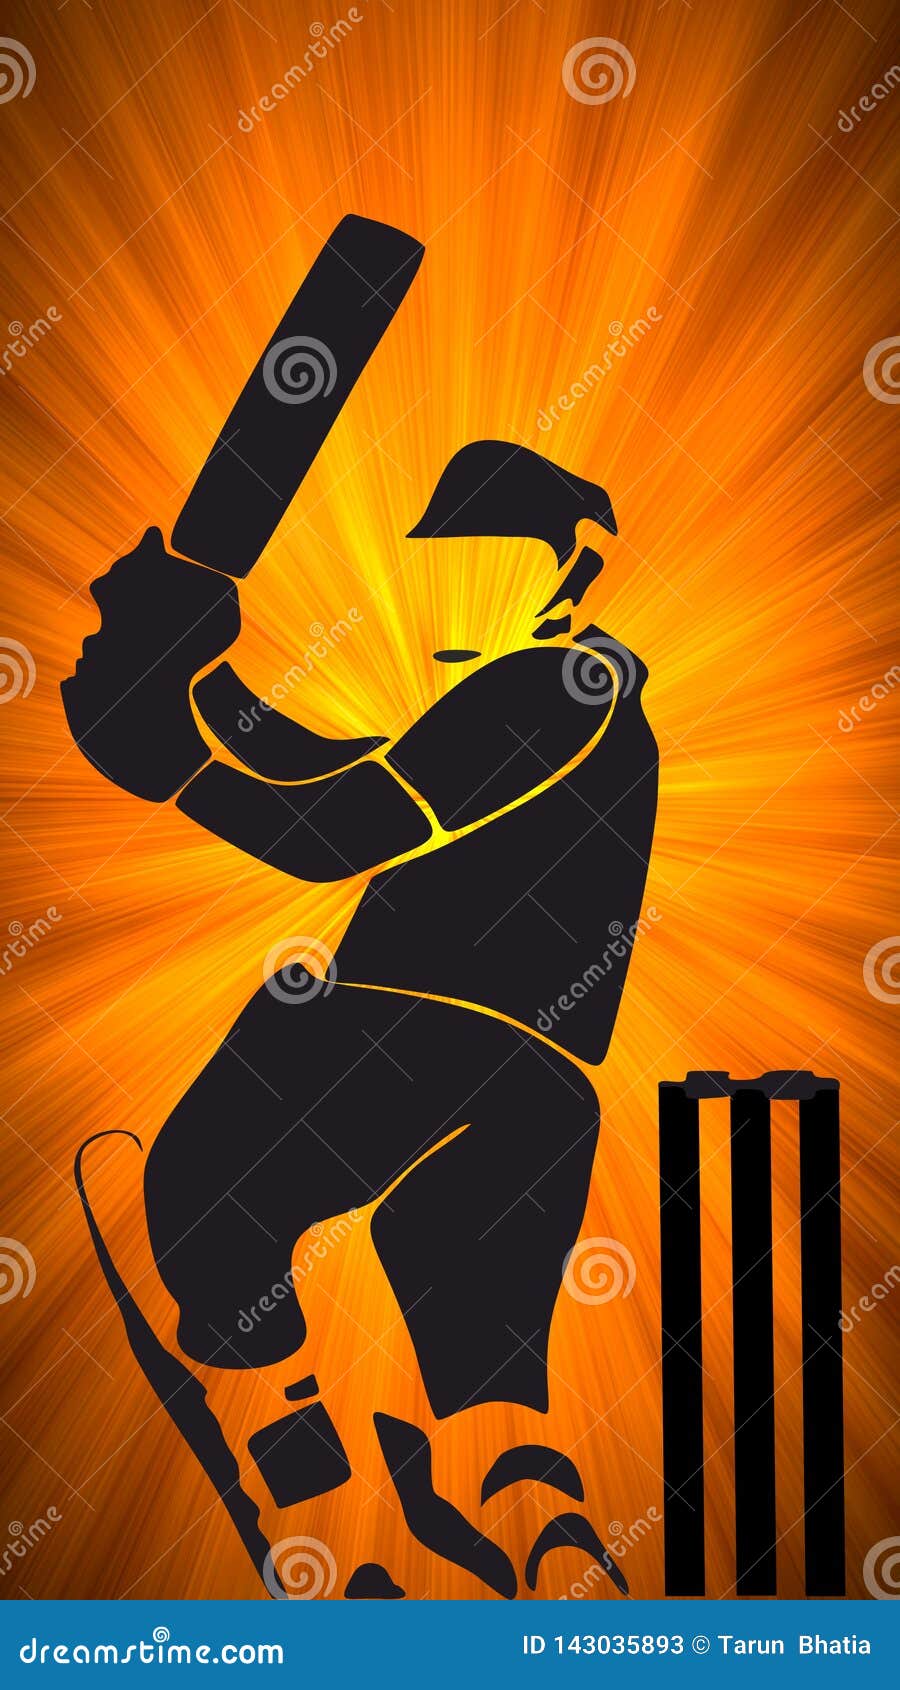 Cricket Wallpapers 66 pictures